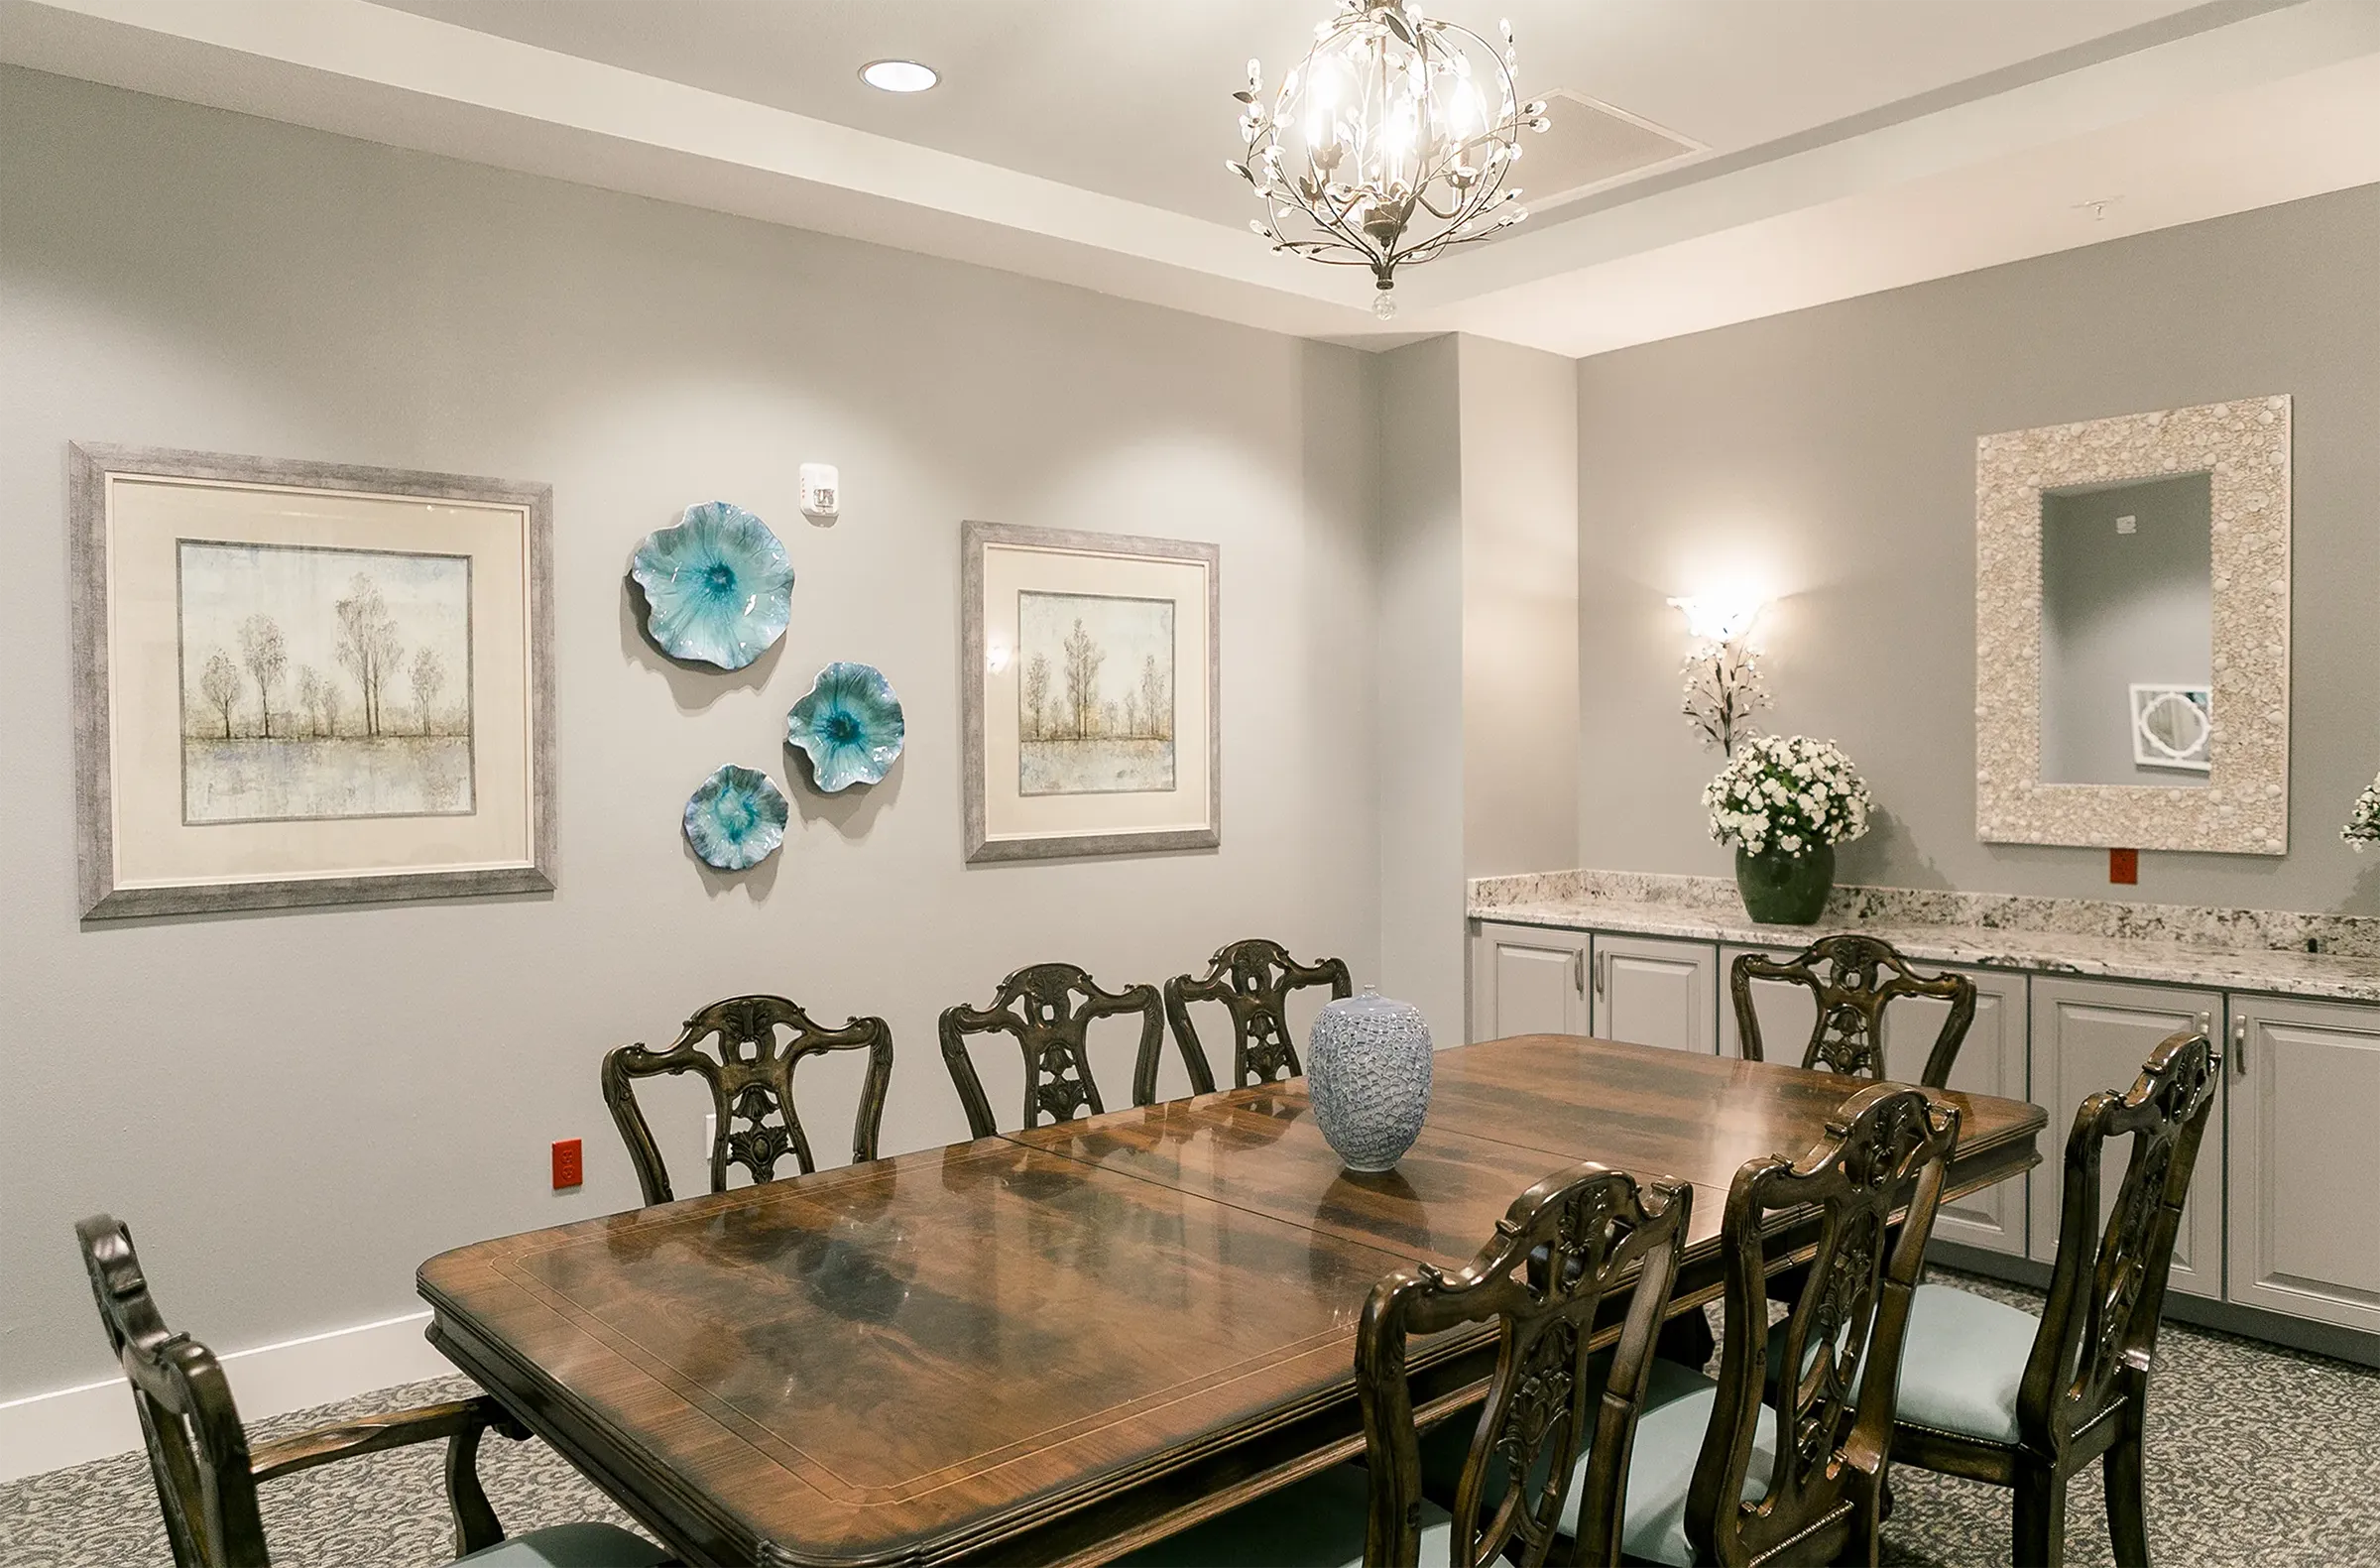 A formal dining room at The Gallery at Cape Coral.